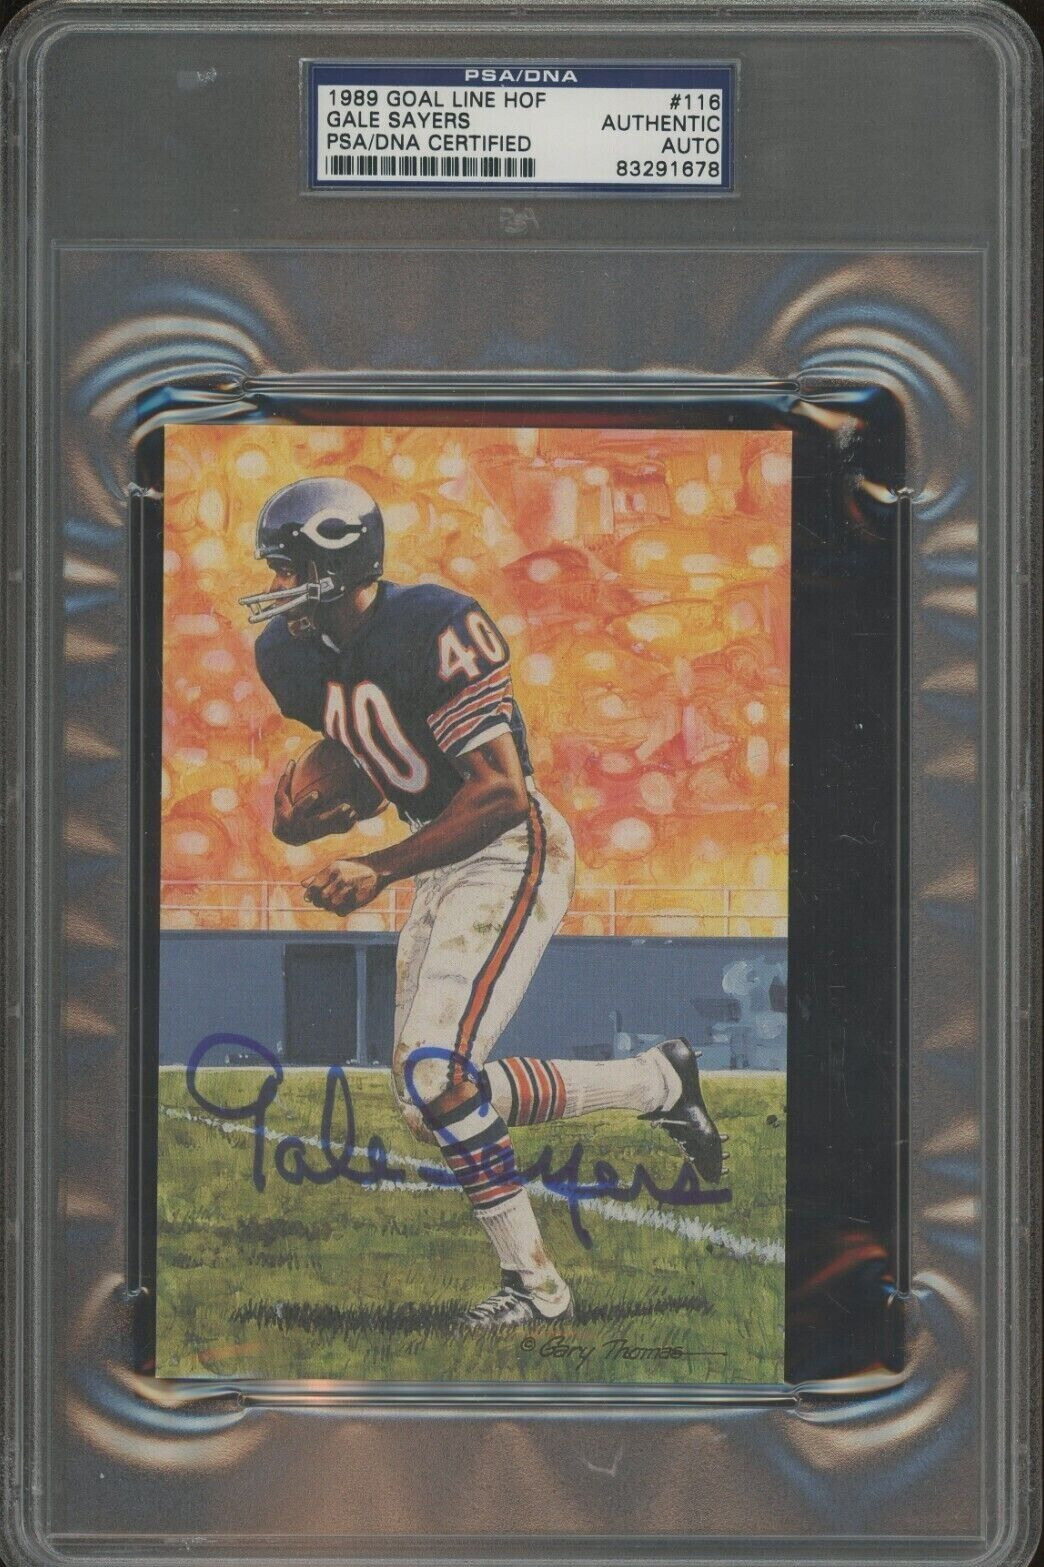 Gale Sayers HOF Chicago Bears Signed 1989 Goal Line #116 PSA/DNA AUTO /5000